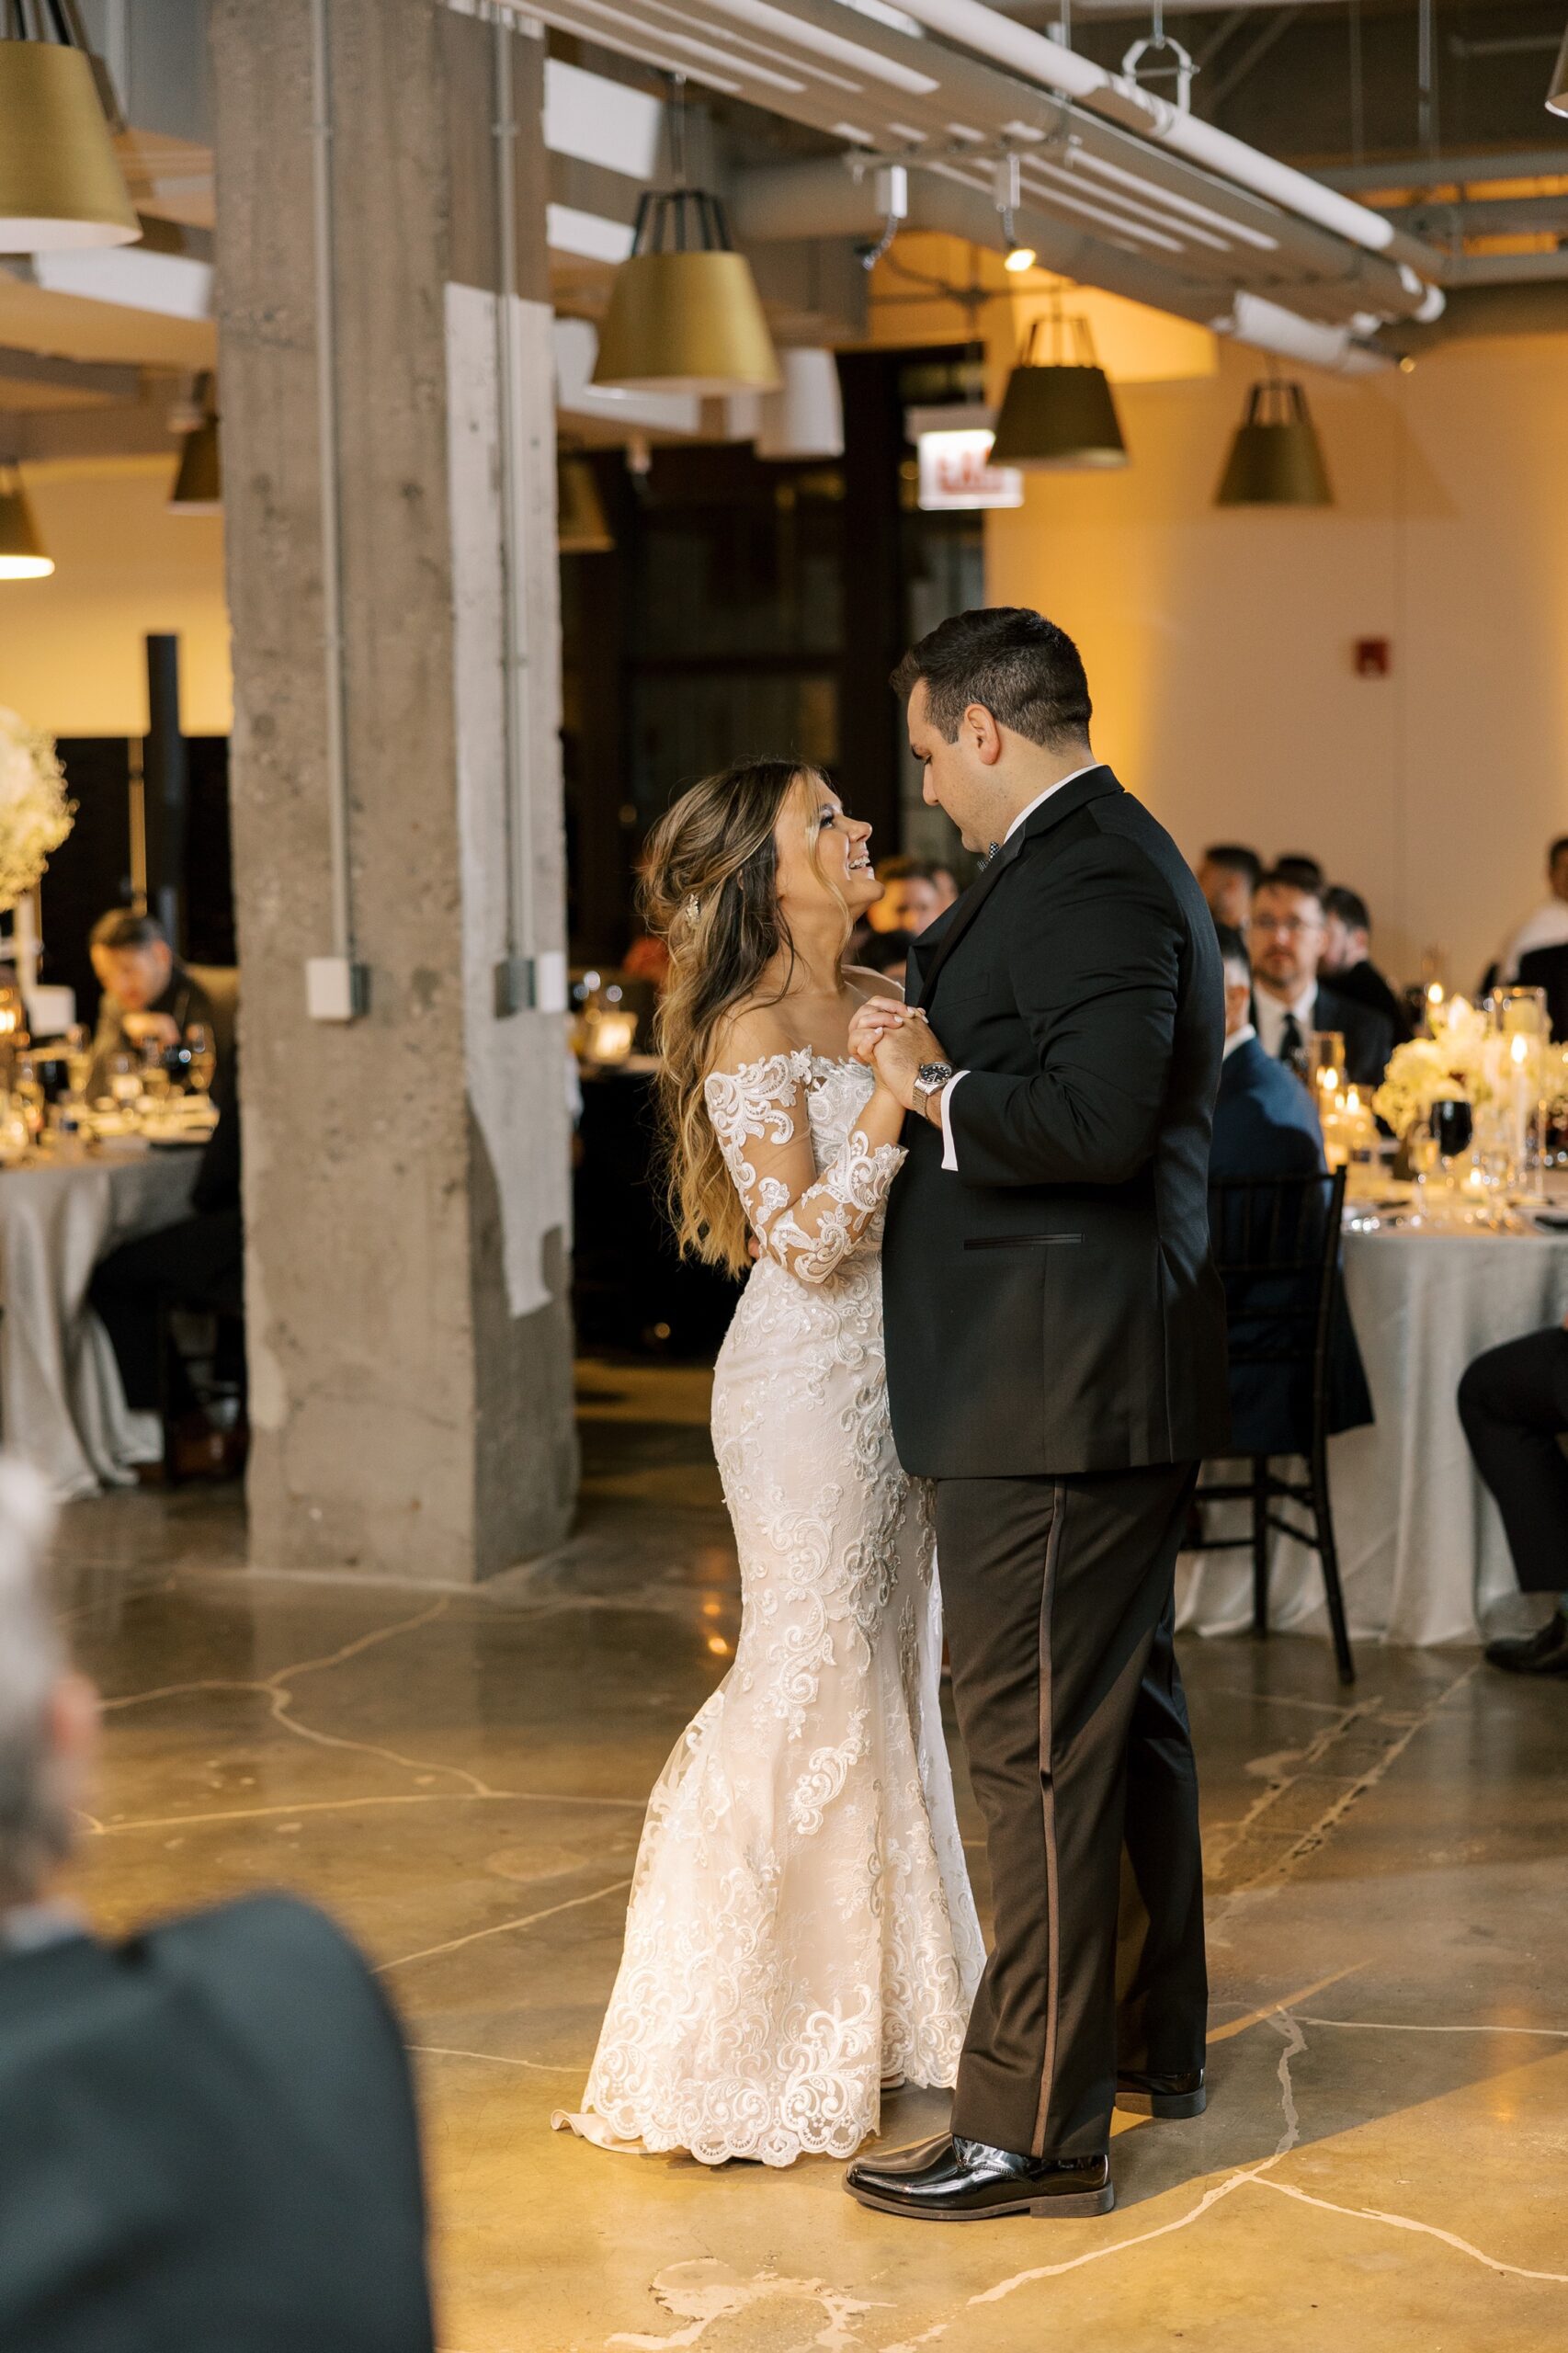 Bride and groom first dance at Chicago wedding